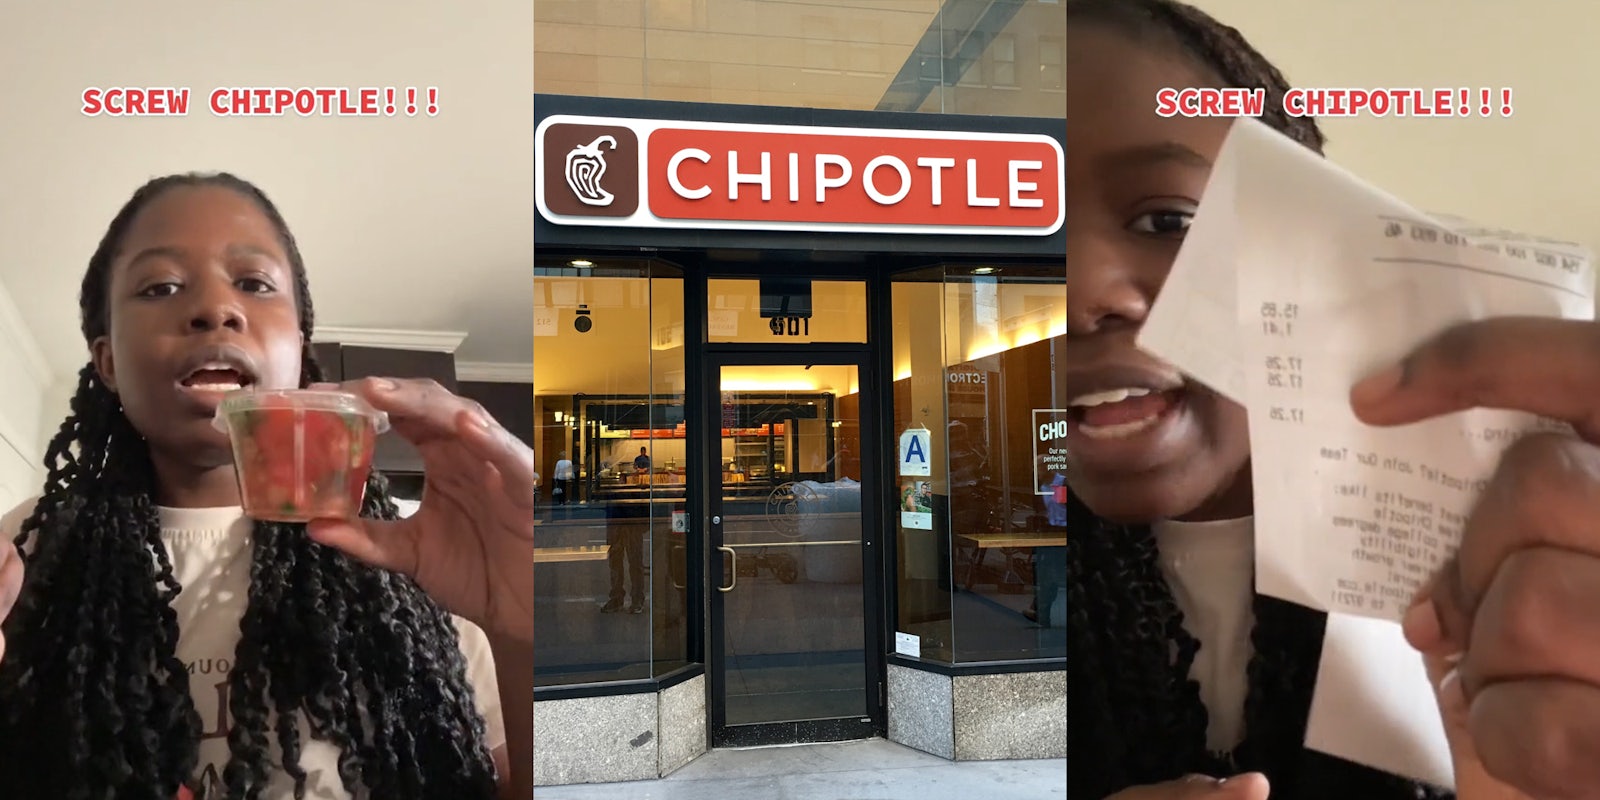 customer speaking holding container from Chipotle with caption 'SCREW CHIPOTLE!!!' (l) Chipotle sign on building with sidewalk (c) customer holding receipt with caption 'SCREW CHIPOTLE!!!' (r)